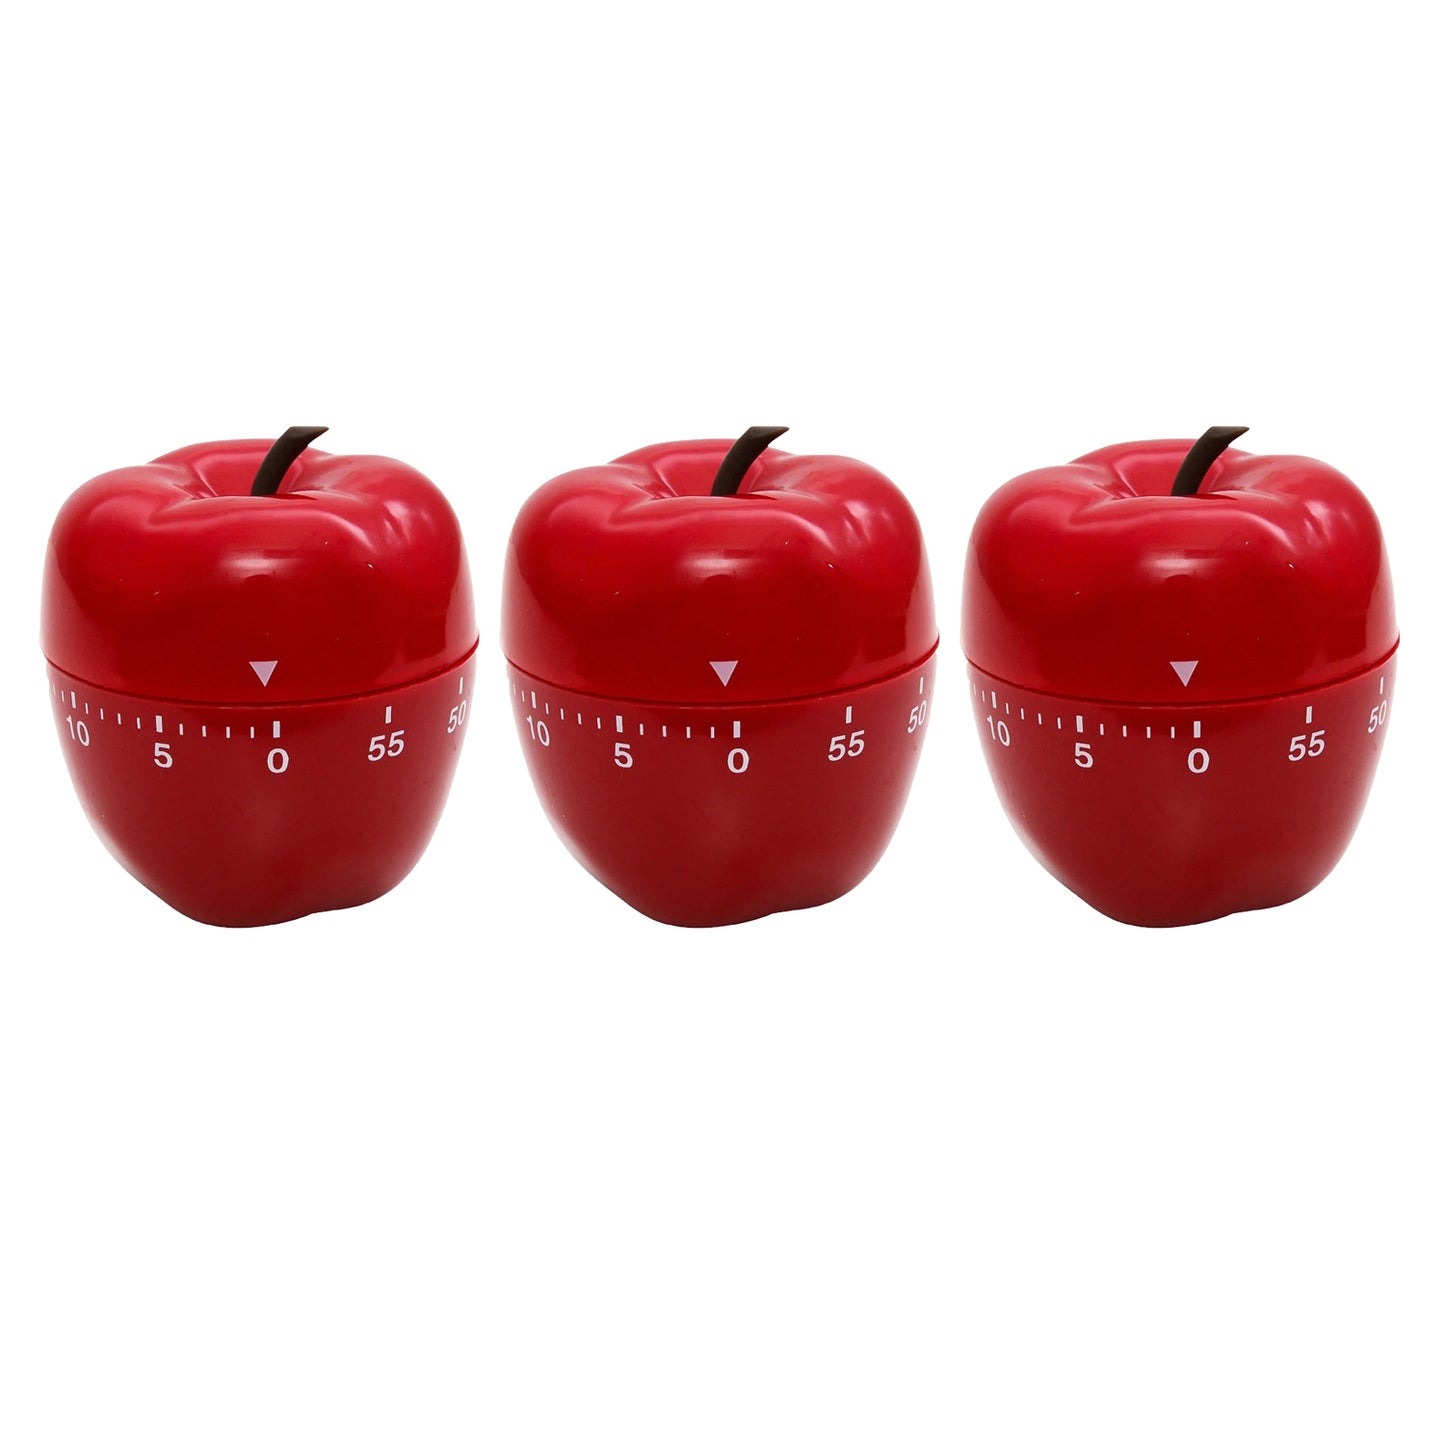 Apple-Shaped Timer, Red, Pack of 3